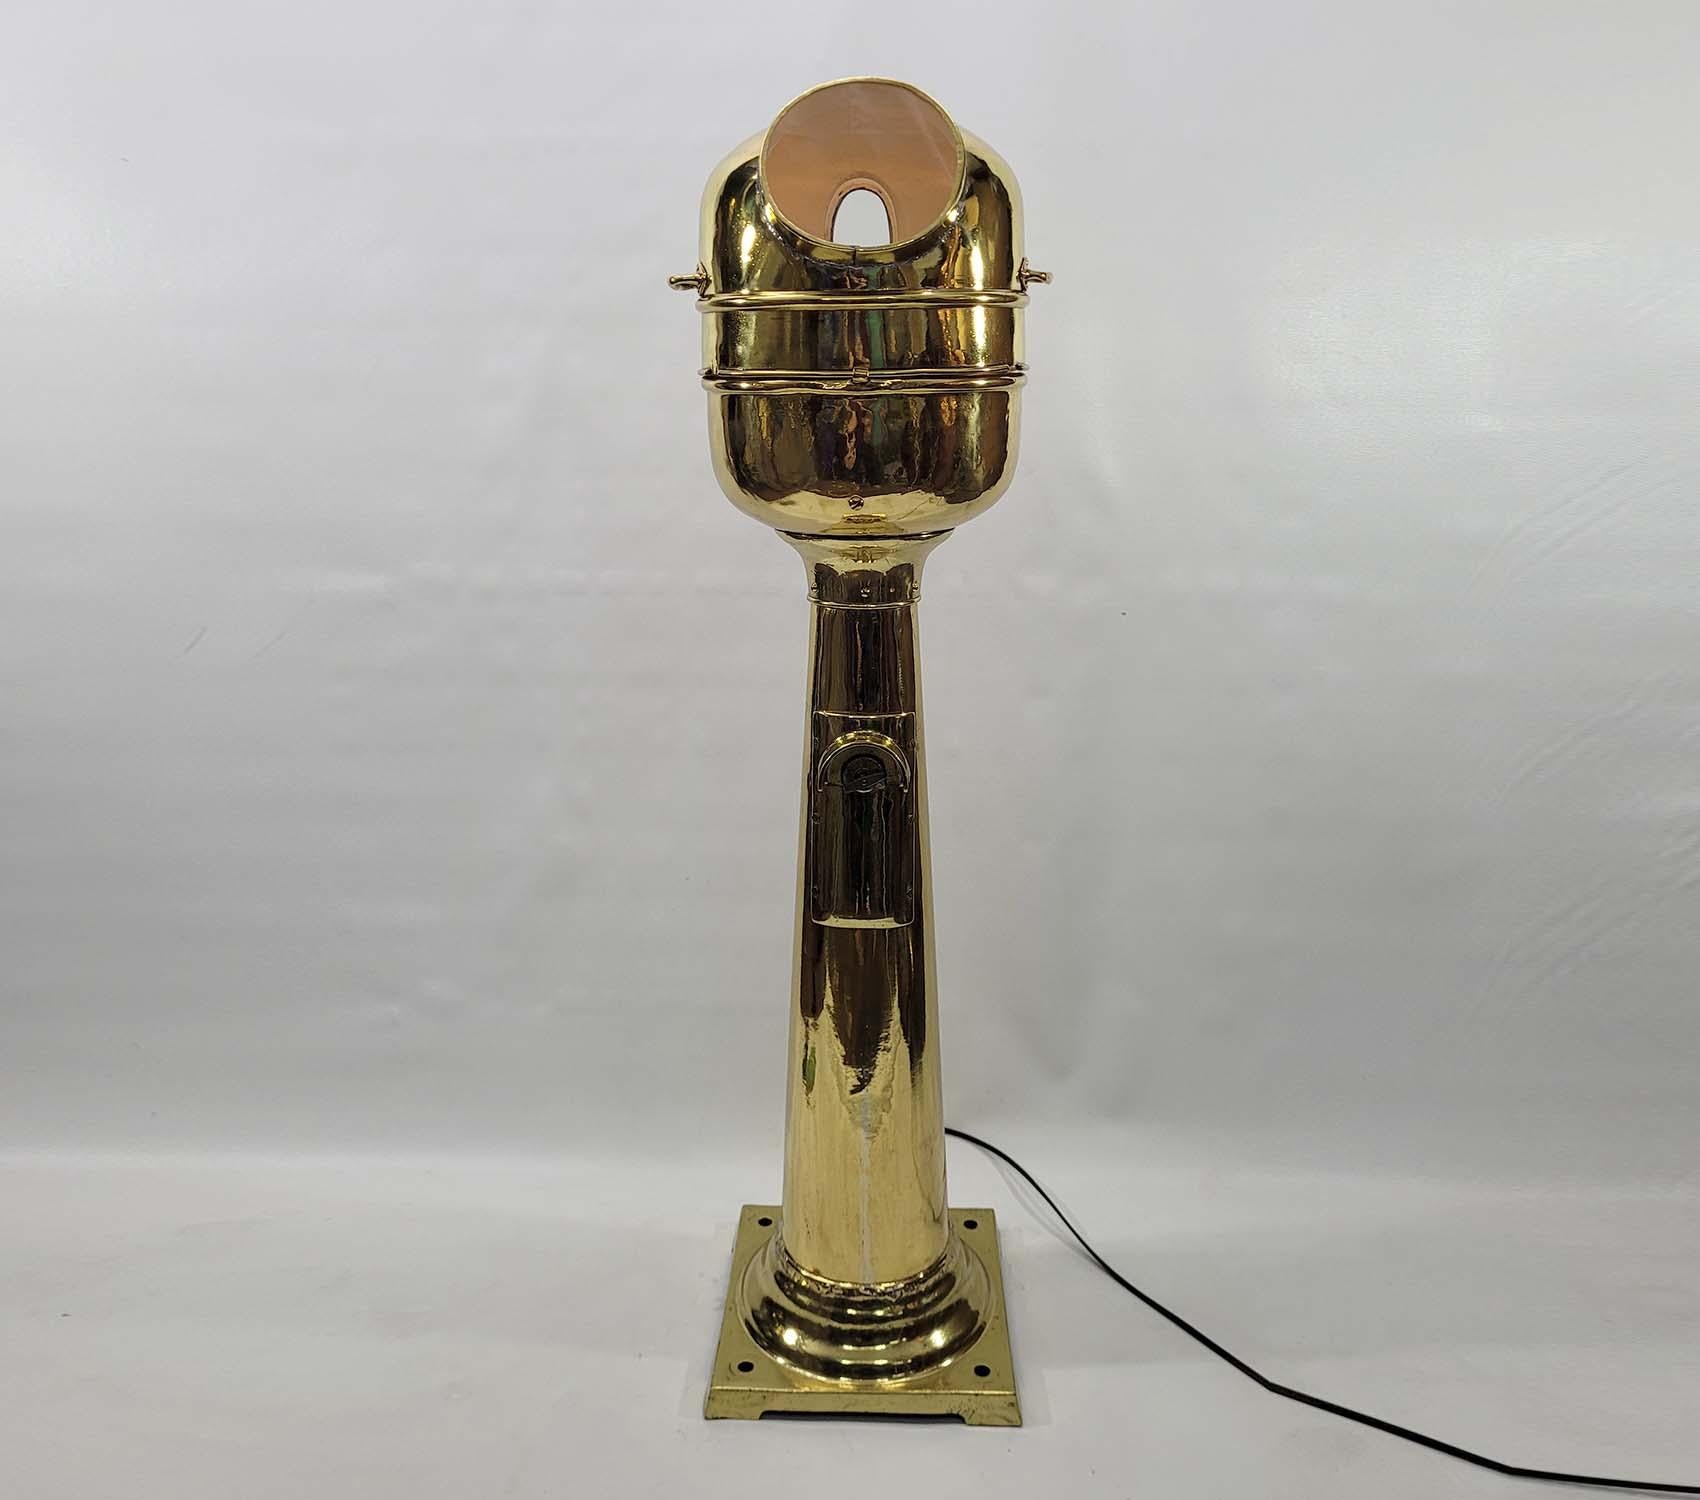 Pedestal Binnacle by Kelvin Bottomley and Baird LTD In Good Condition For Sale In Norwell, MA